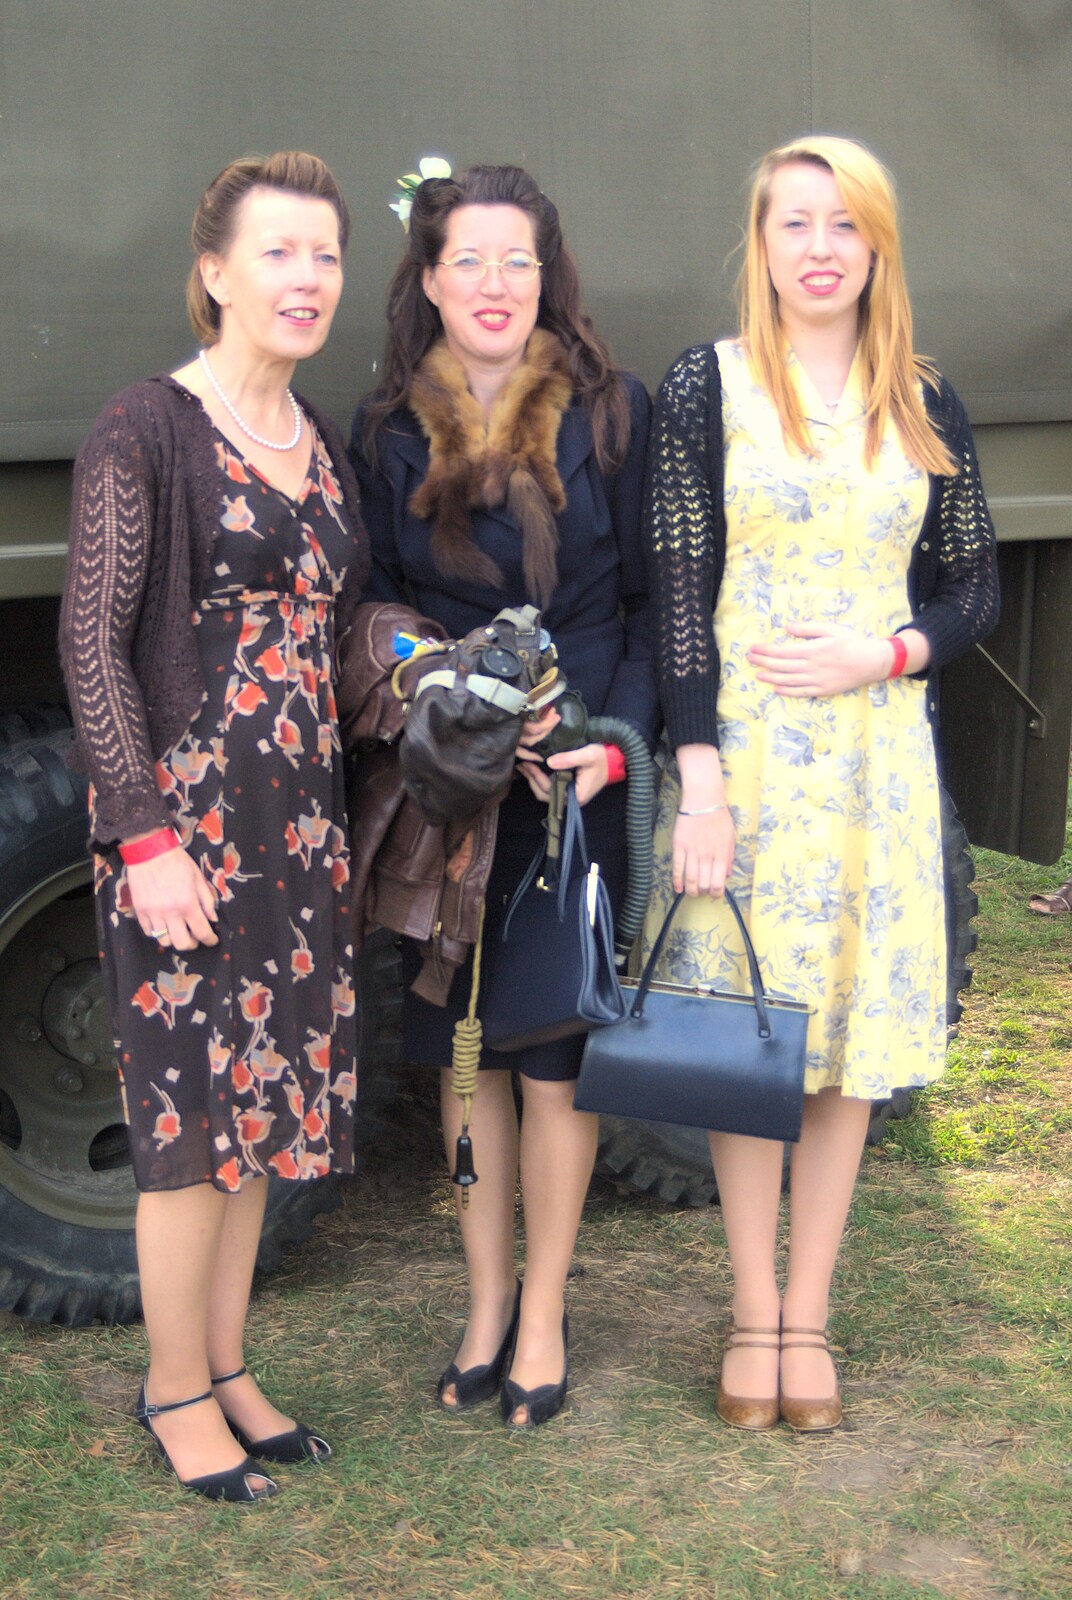 Suzanne, her sister, and Ellie pose by the truck from The 1940s Steam Train Weekend, Holt, Norfolk - 18th September 2011